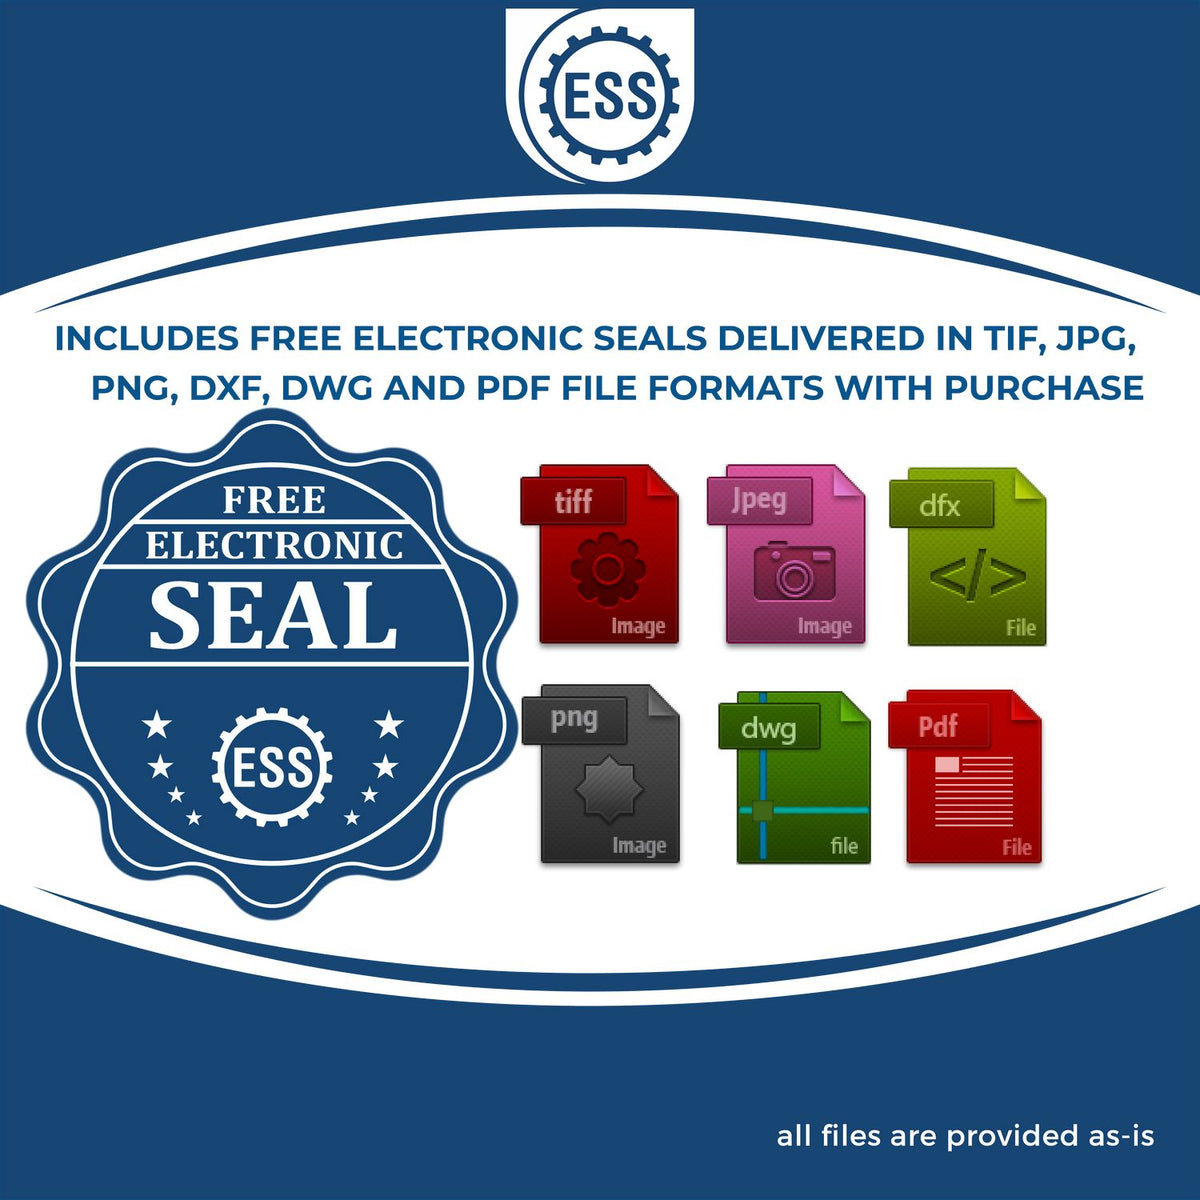 An infographic for the free electronic seal for the Montana Professional Engineer Seal Stamp illustrating the different file type icons such as DXF, DWG, TIF, JPG and PNG.